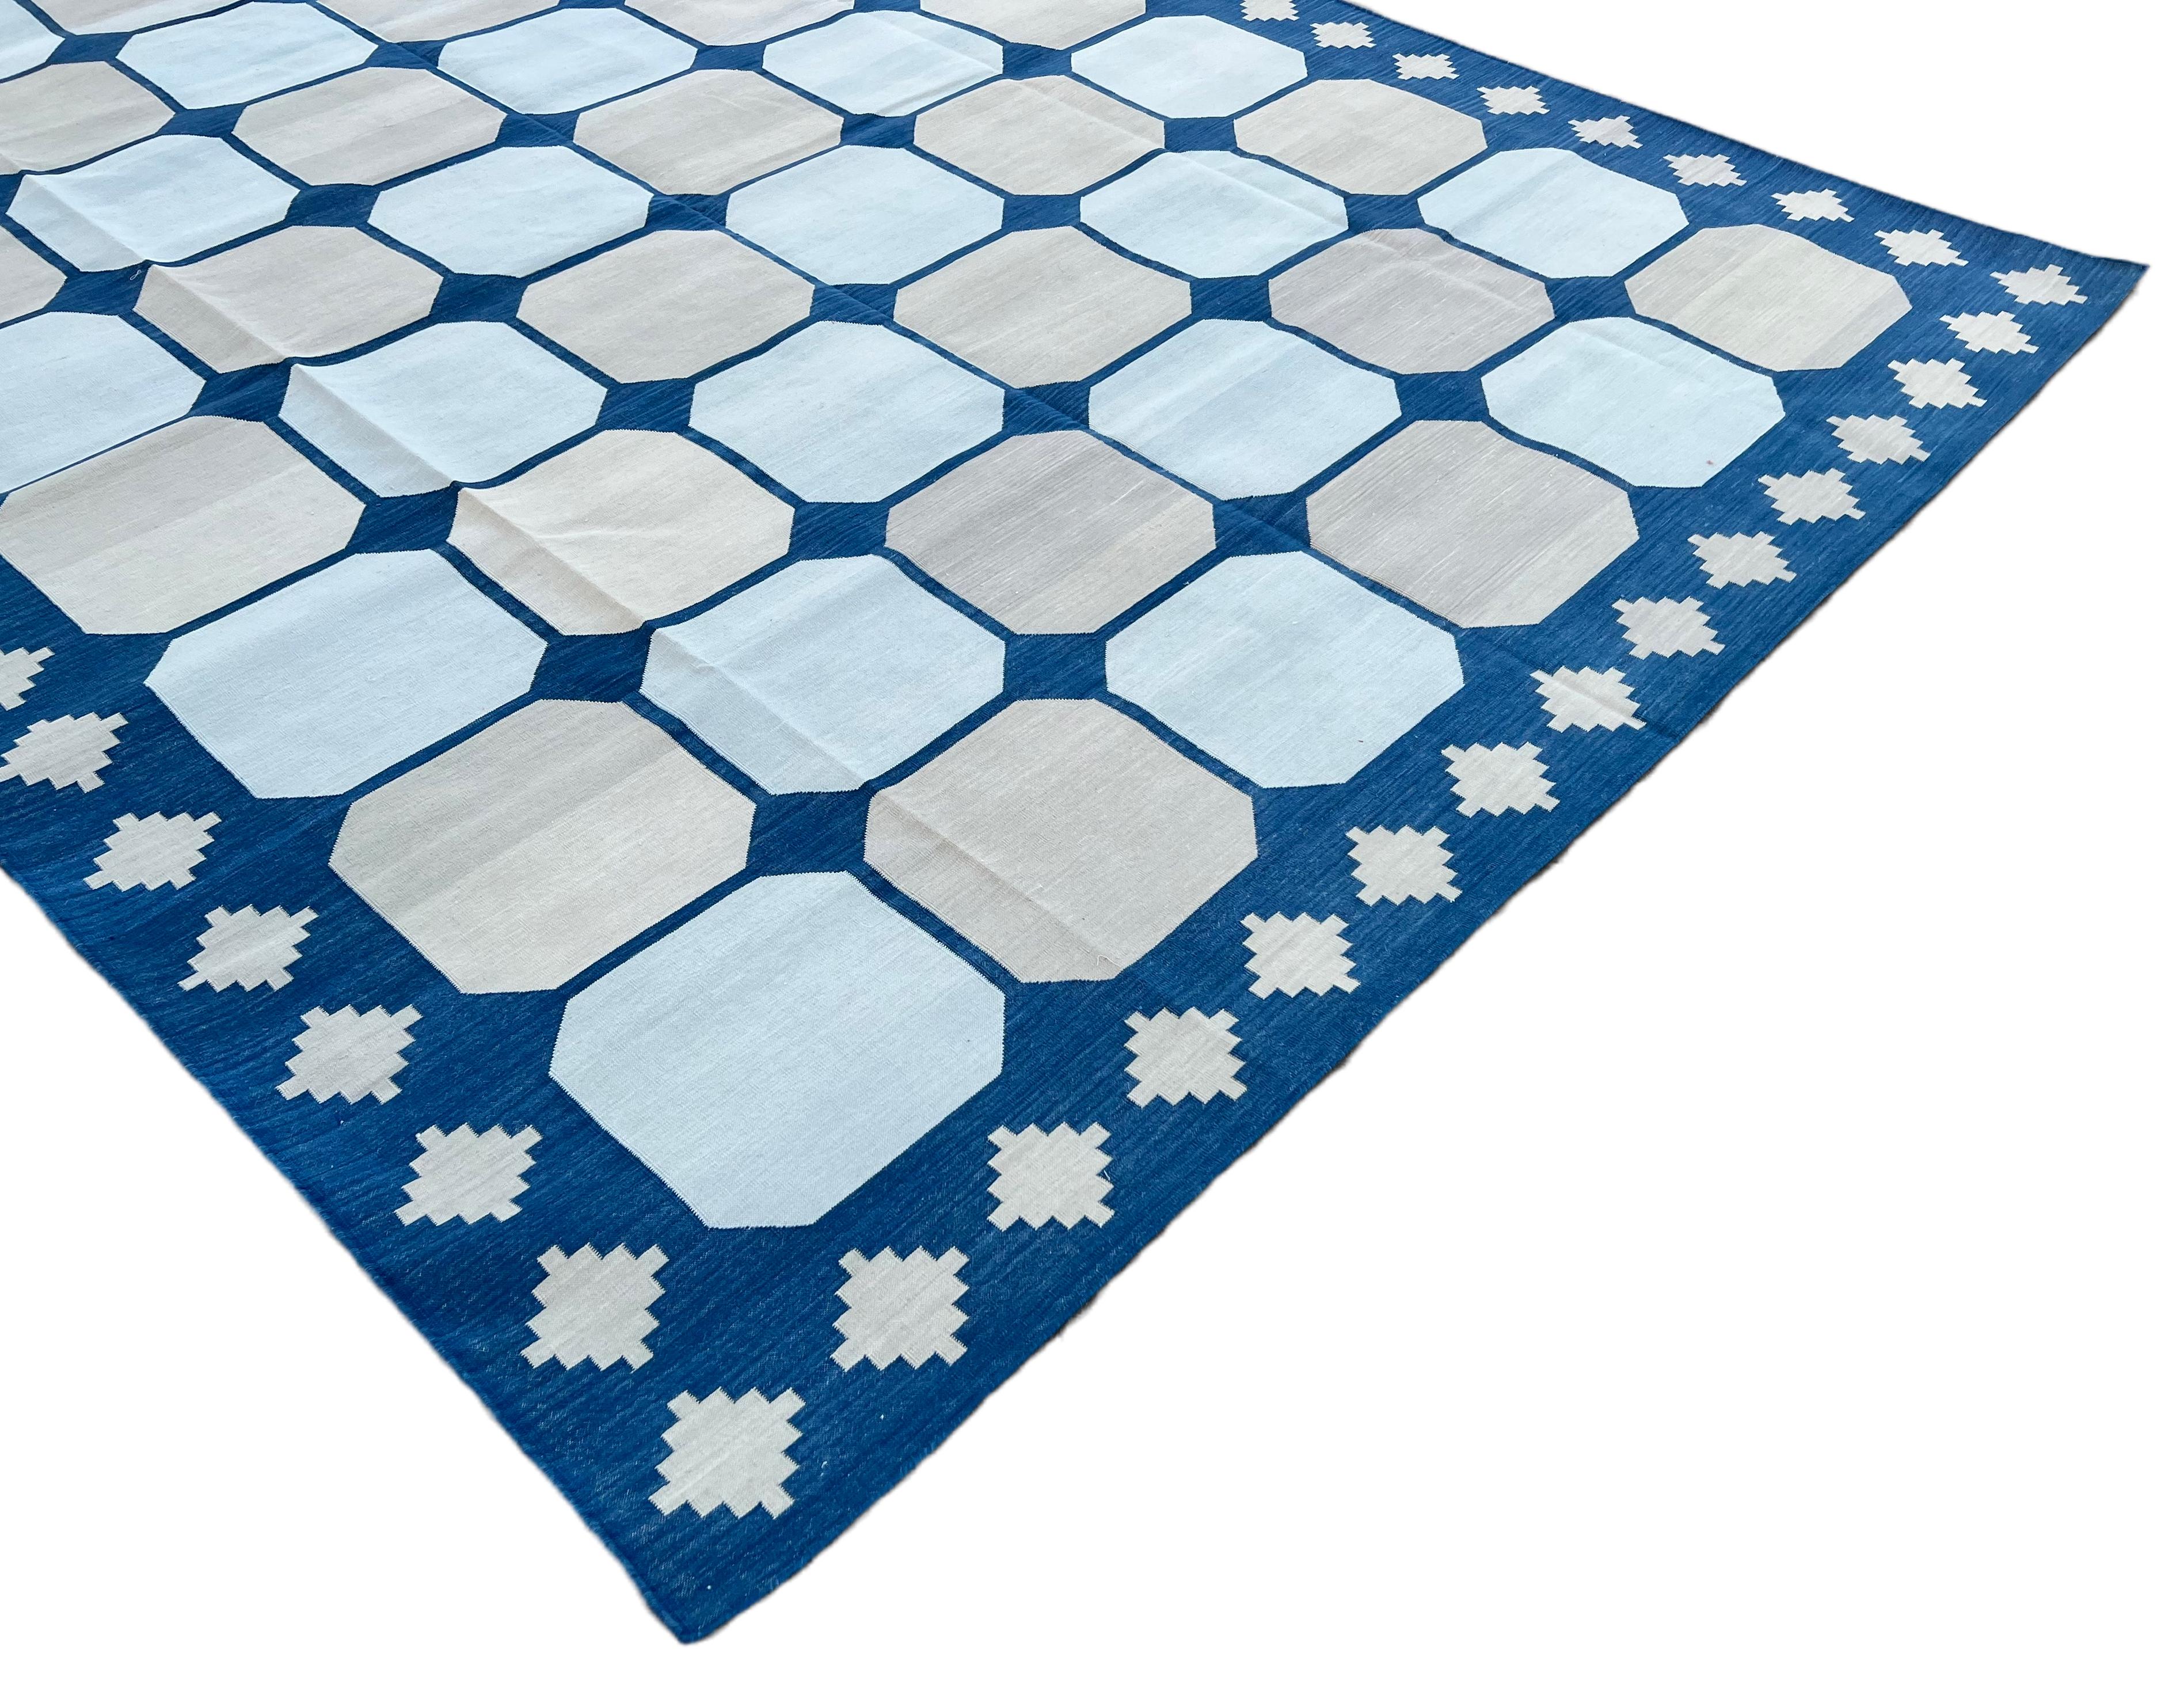 Hand-Woven Handmade Cotton Area Flat Weave Rug, Blue & Beige Geometric Tile Indian Dhurrie For Sale